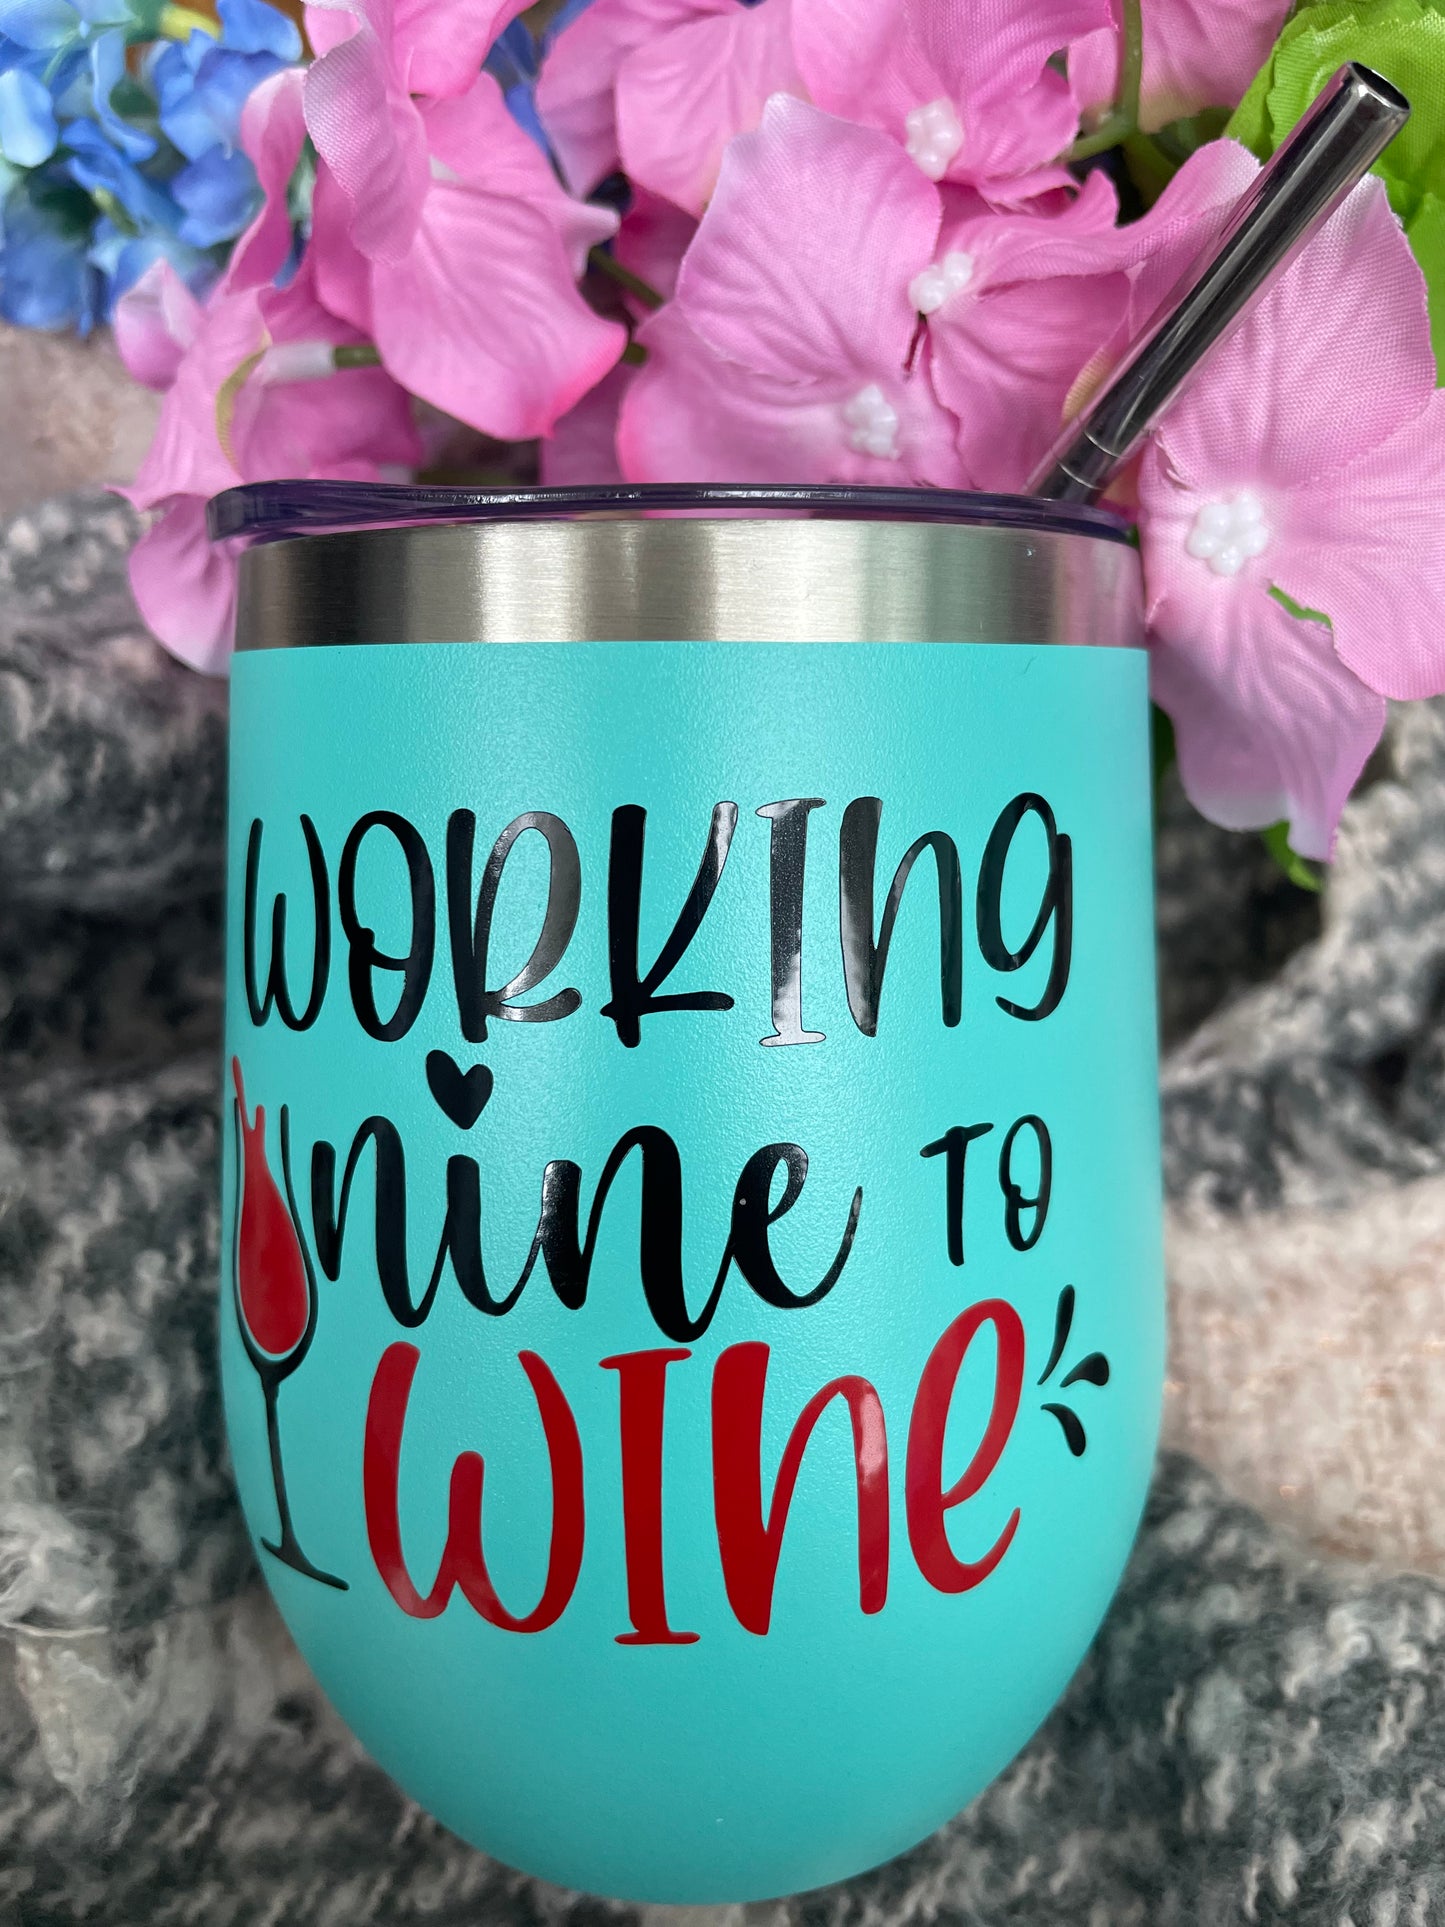 Ready to Ship Wine Tumblers – George-Gia Online Variety